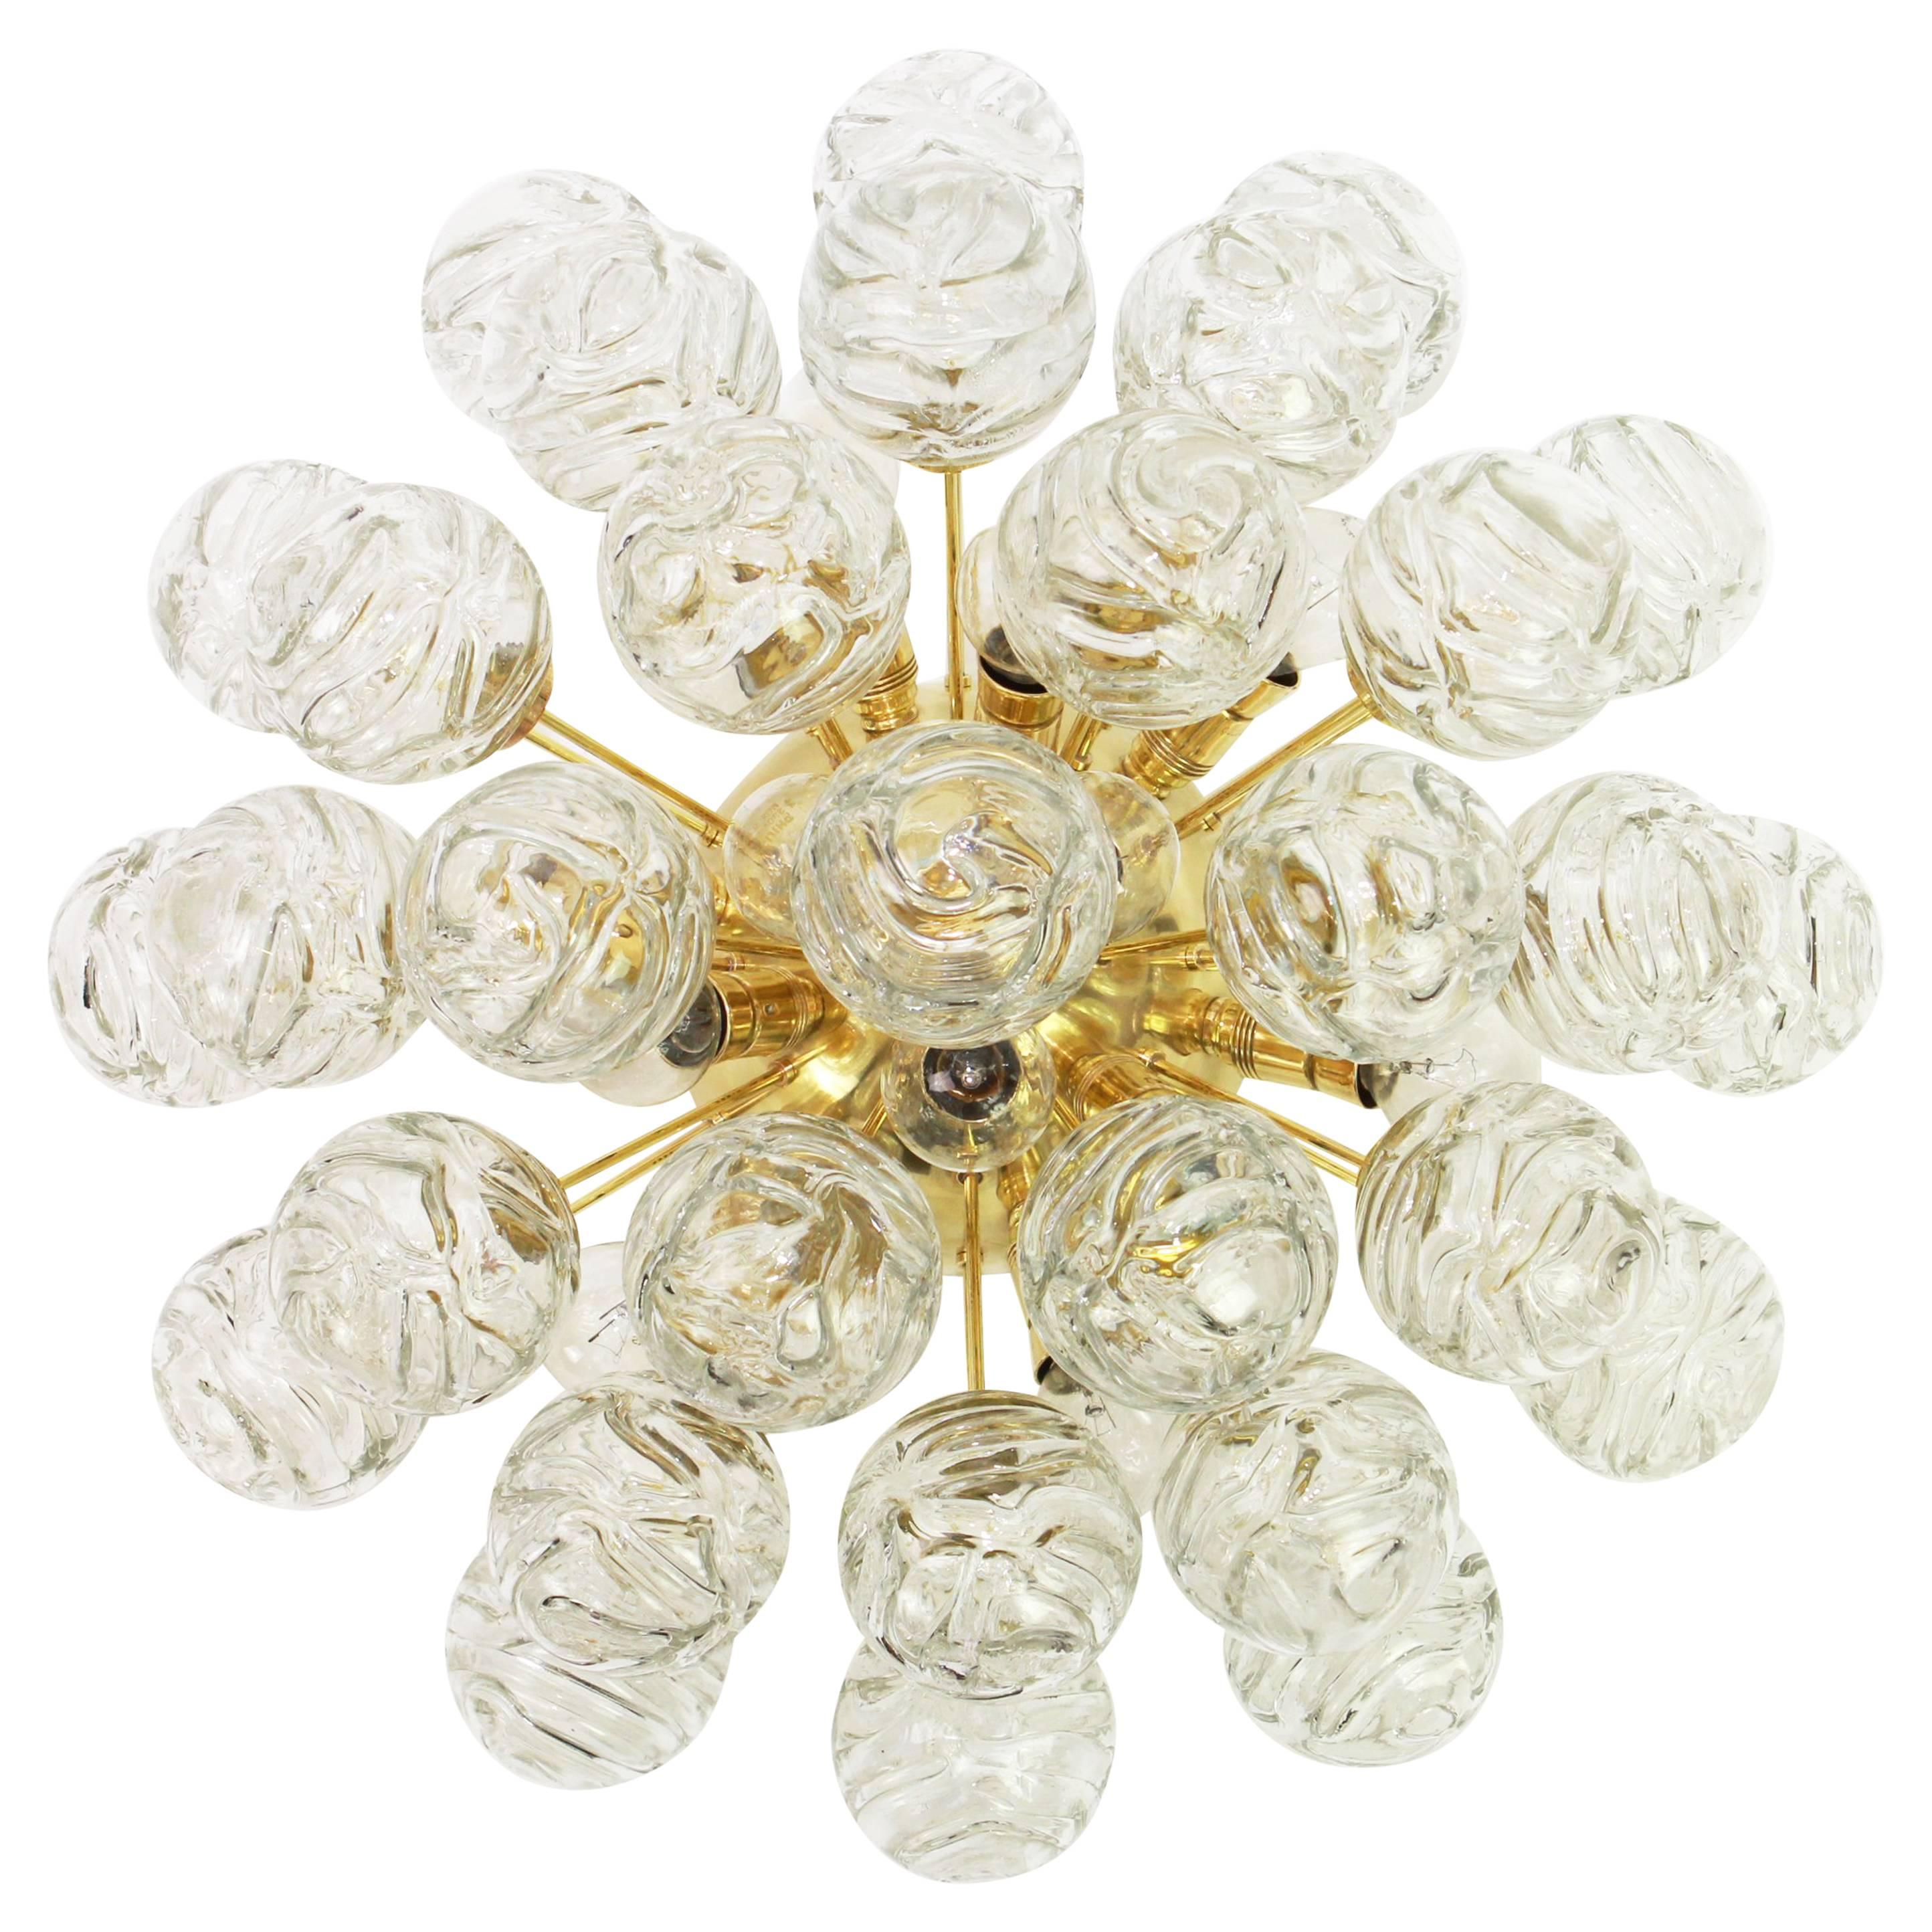 Spectacular Sputnik flushmount with glass snowballs designed by Doria, Germany, 1970s.
All glass balls are in good condition.
It needs 12 small size bulbs (E-14 bulbs) up to 40 watts each and is compatible with the US /UK/ .. Standards.

2 items